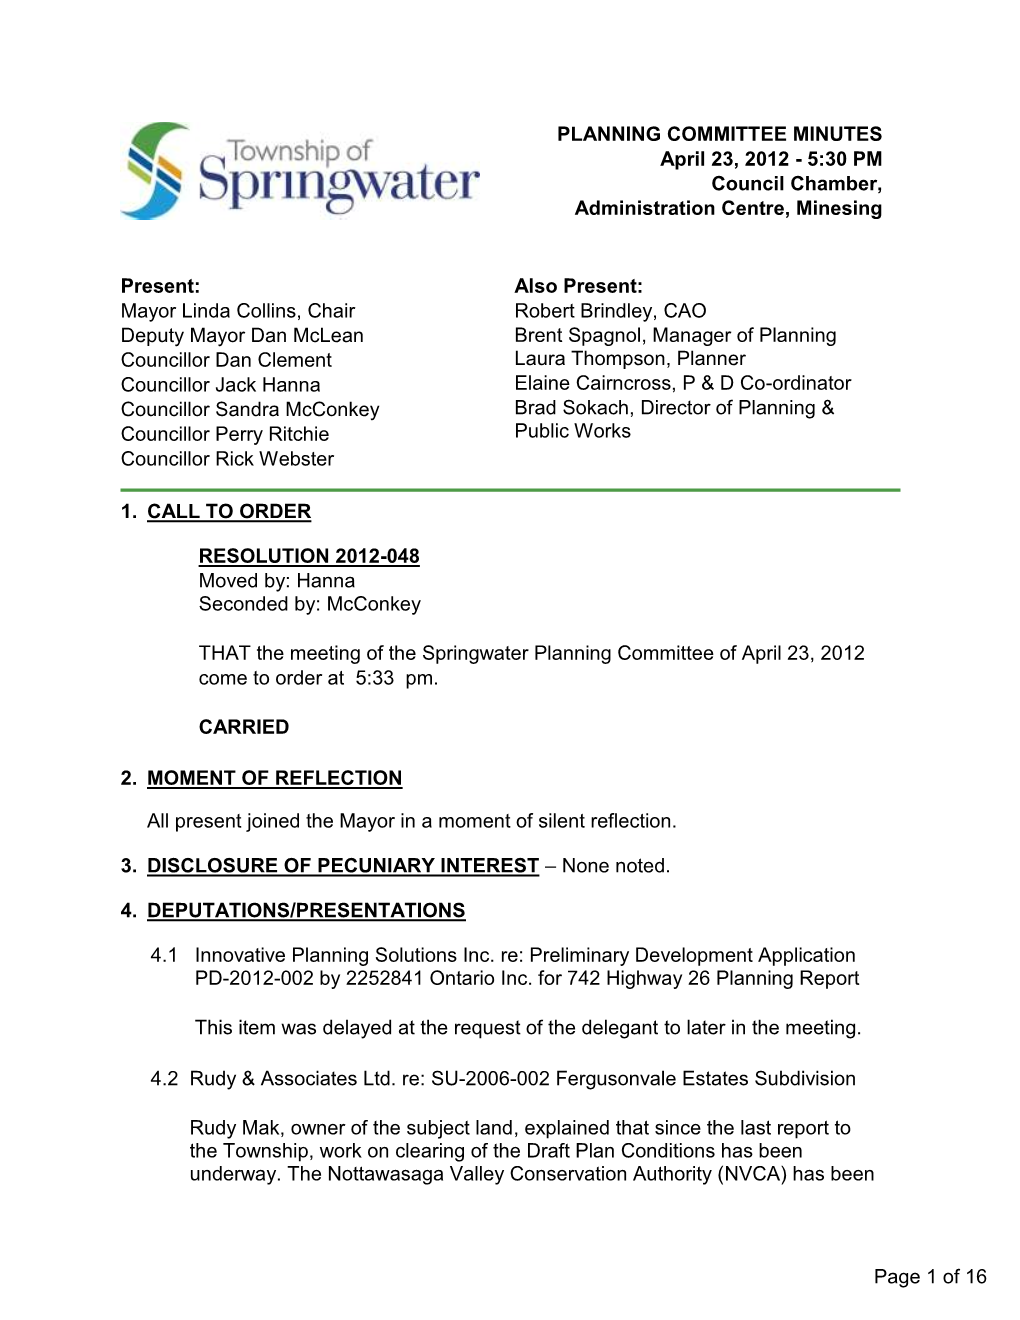 PLANNING COMMITTEE MINUTES April 23, 2012 - 5:30 PM Council Chamber, Administration Centre, Minesing